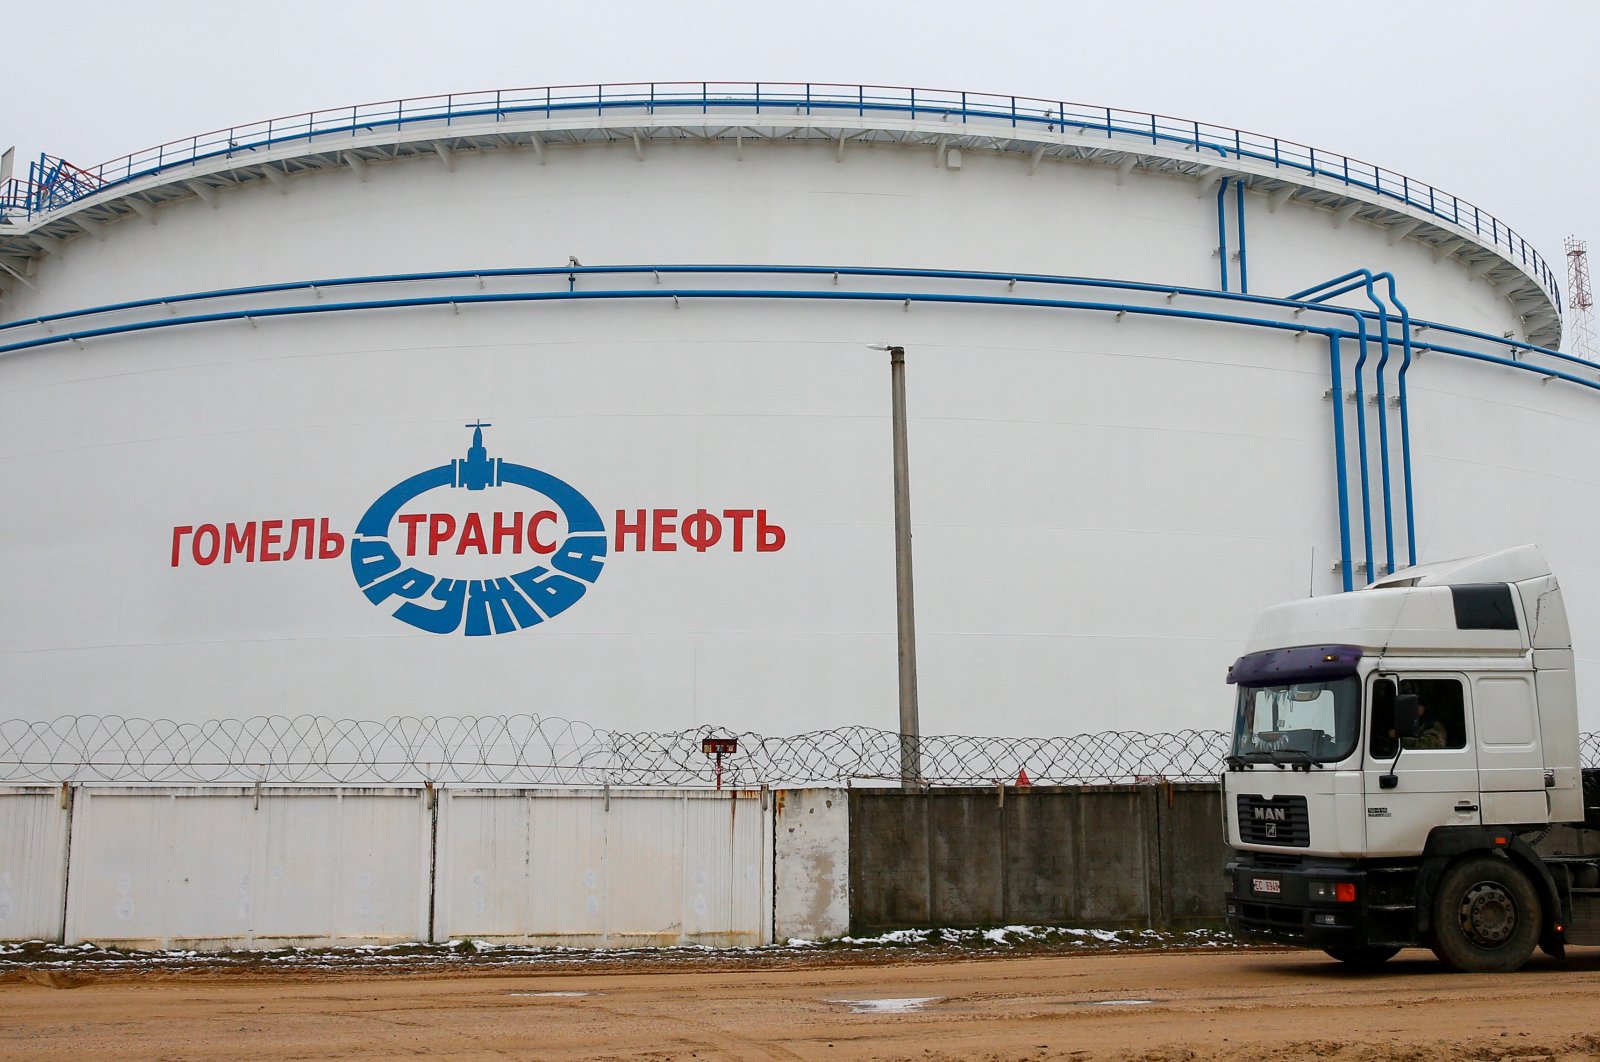 A storage tank is pictured at the Gomel Transneft oil pumping station, which moves crude through the Druzhba pipeline westward to Europe, near Mozyr, Belarus, Jan. 4, 2020. (Reuters Photo)